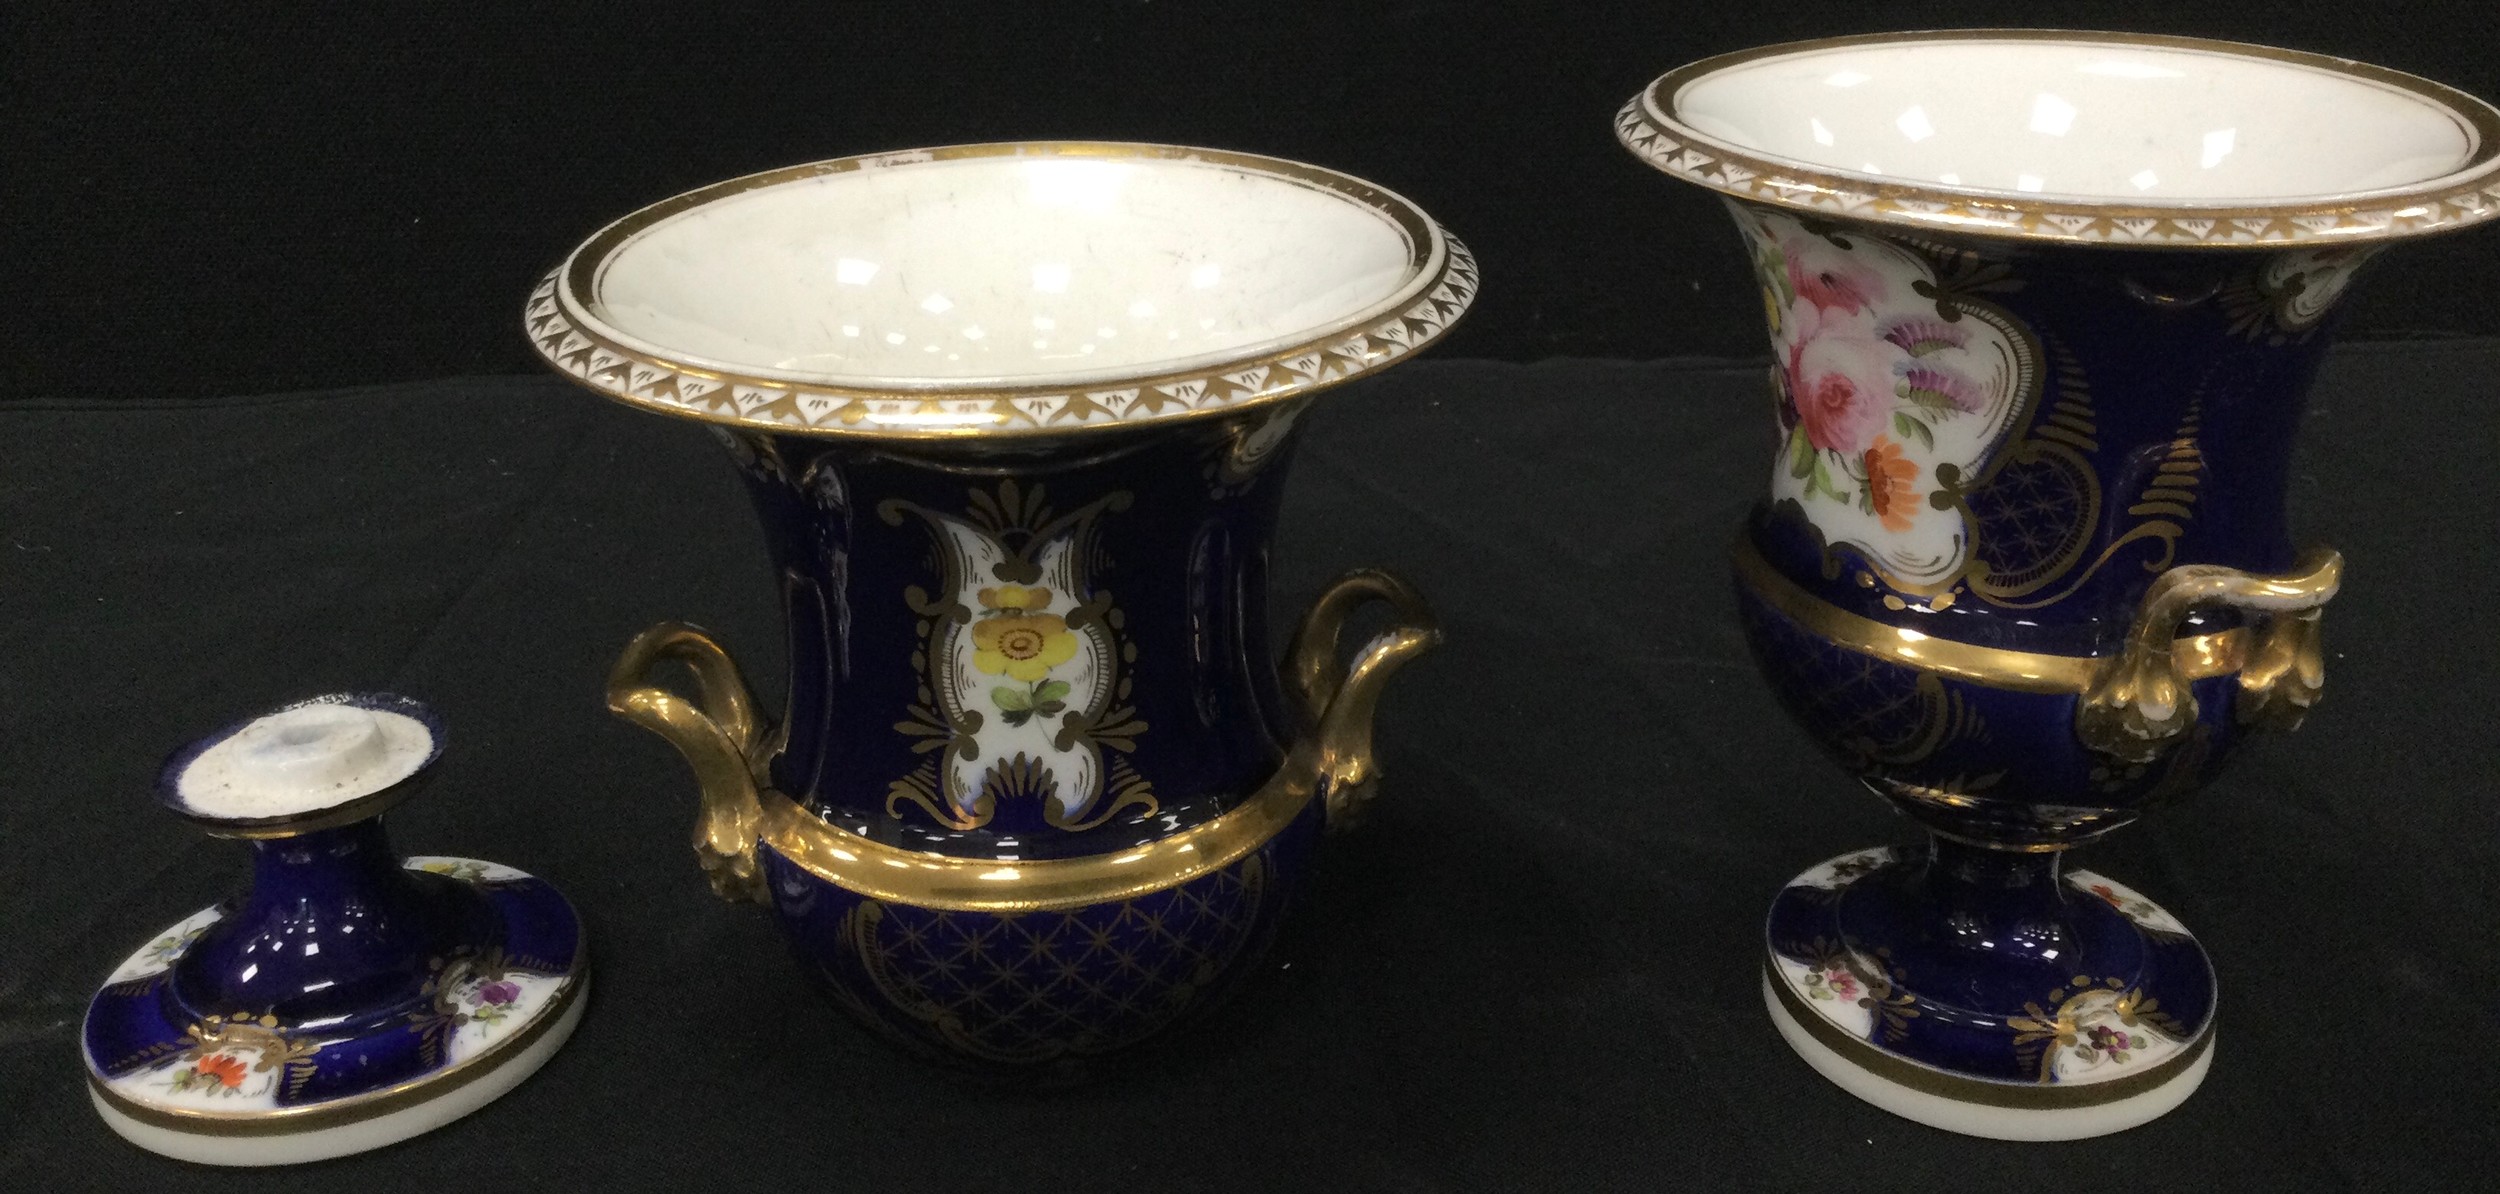 A 19th. Century English porcelain Campana shaped spill vase , painted with floral panels , cobalt